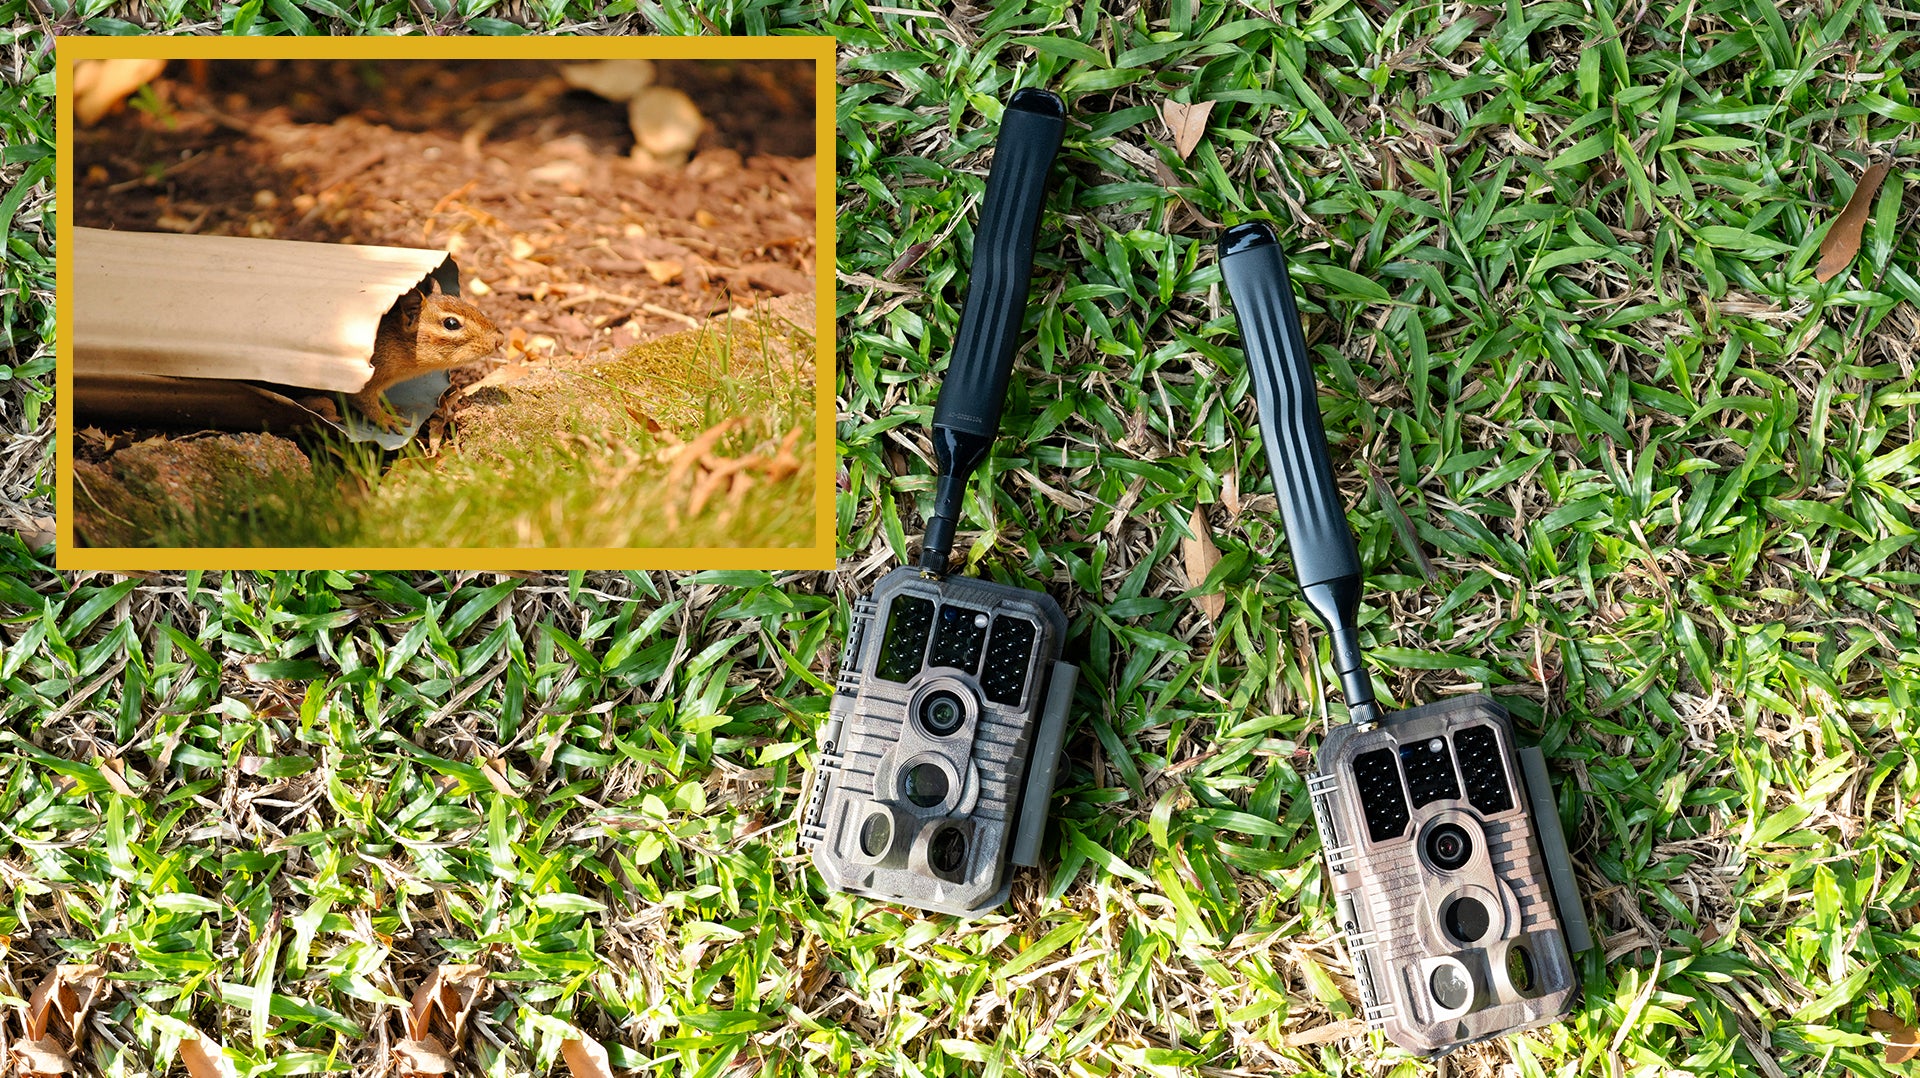 Score Big Savings: Top 3 GardePro Trail Camera Deals You Can't Miss!